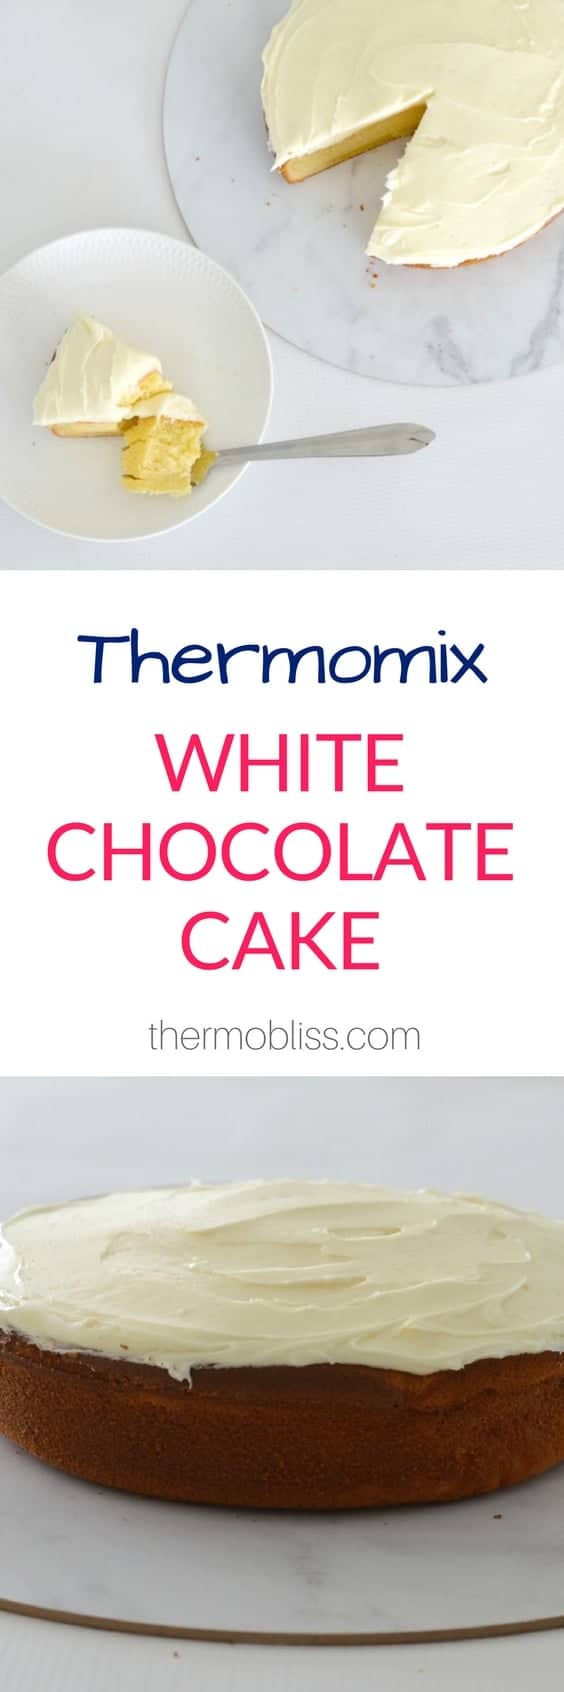 Thermomix White Chocolate Cake with a piece served on a plate